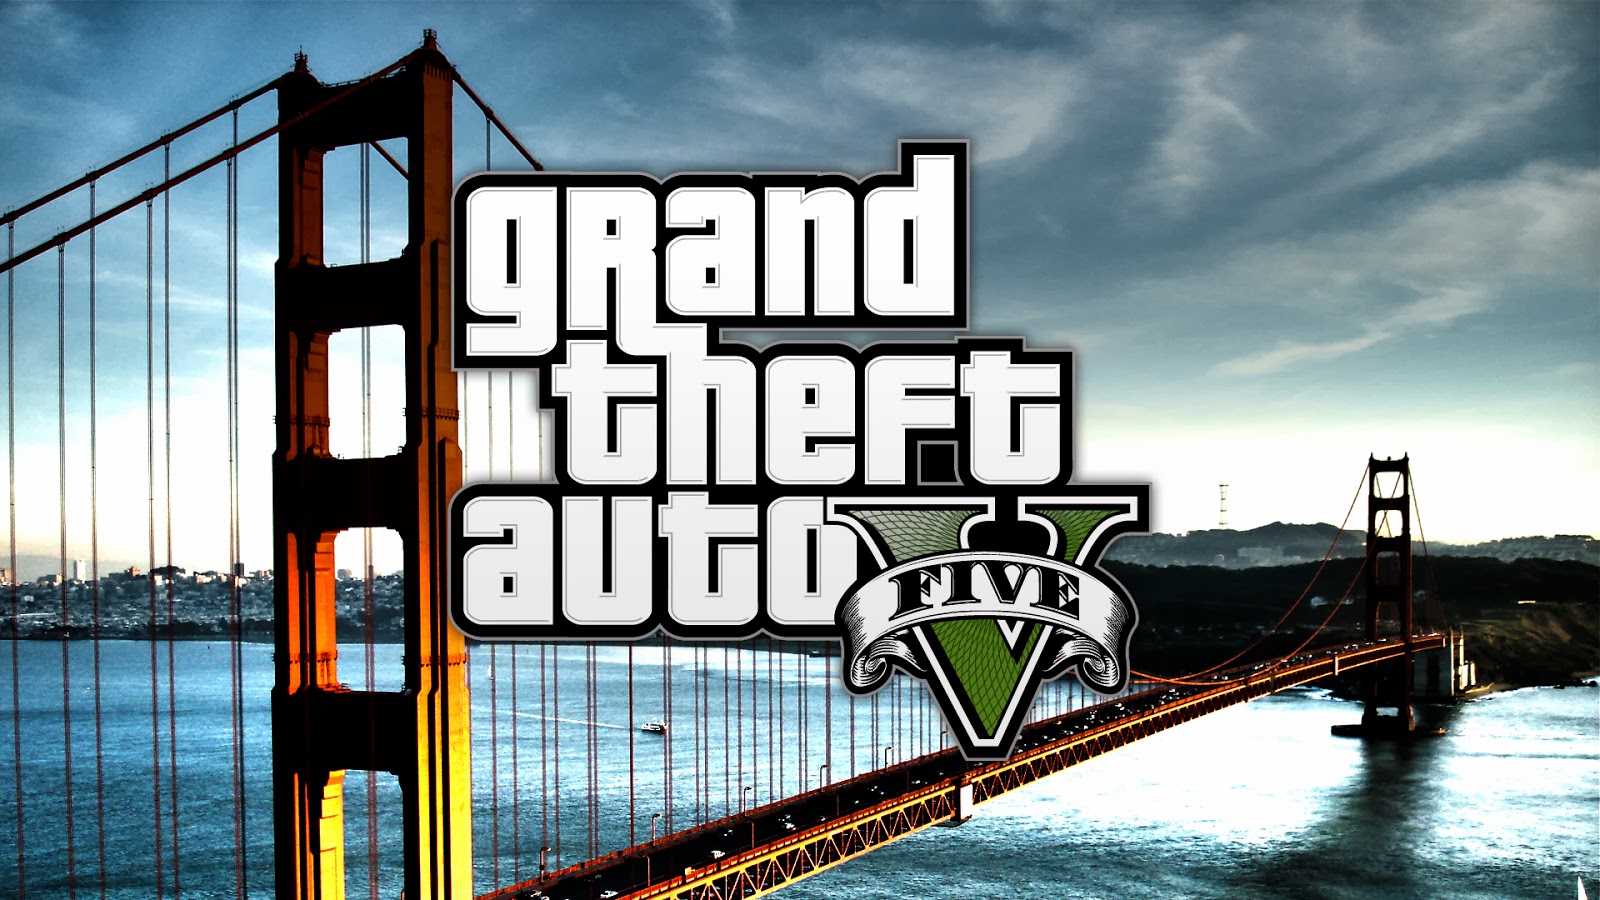 Grand Theft Auto V, Trailer, Official, wallpaper, poster, cover, game ...